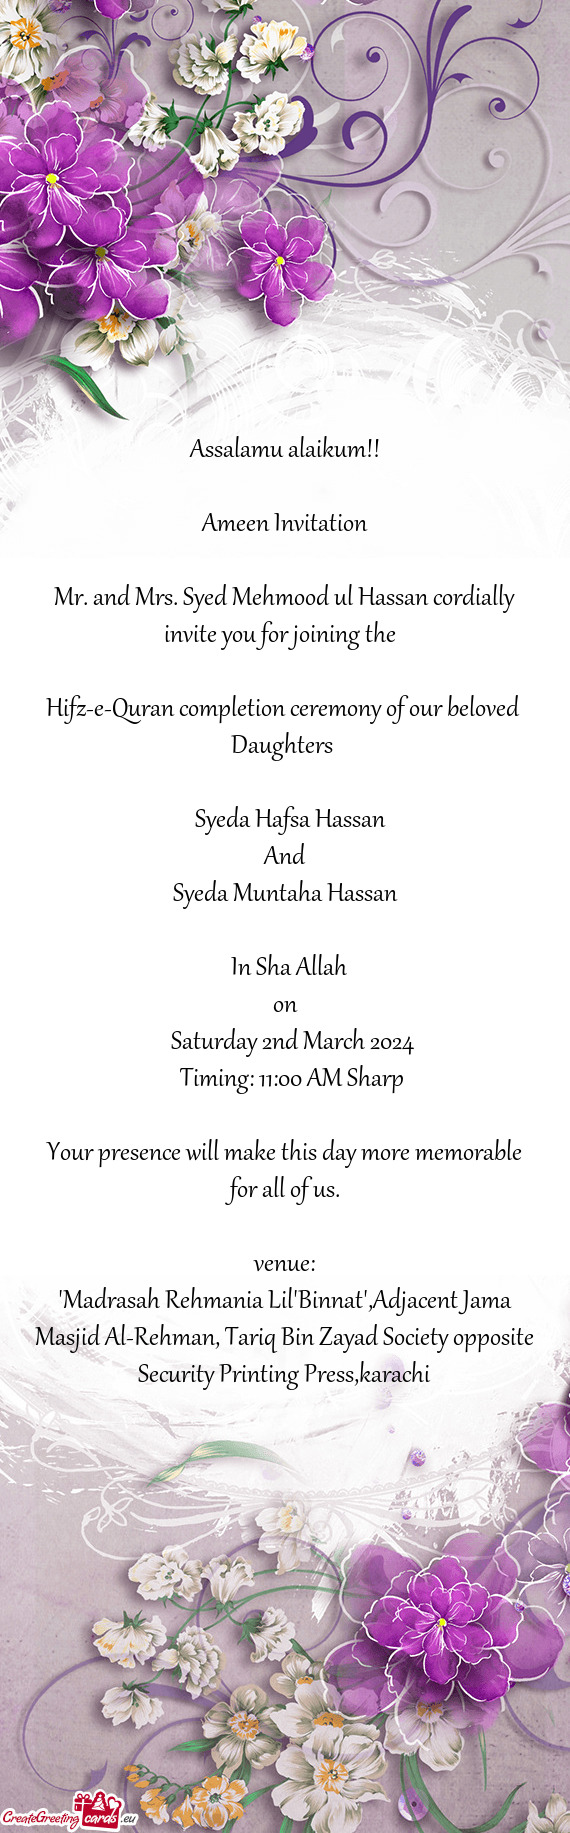 Mr. and Mrs. Syed Mehmood ul Hassan cordially invite you for joining the